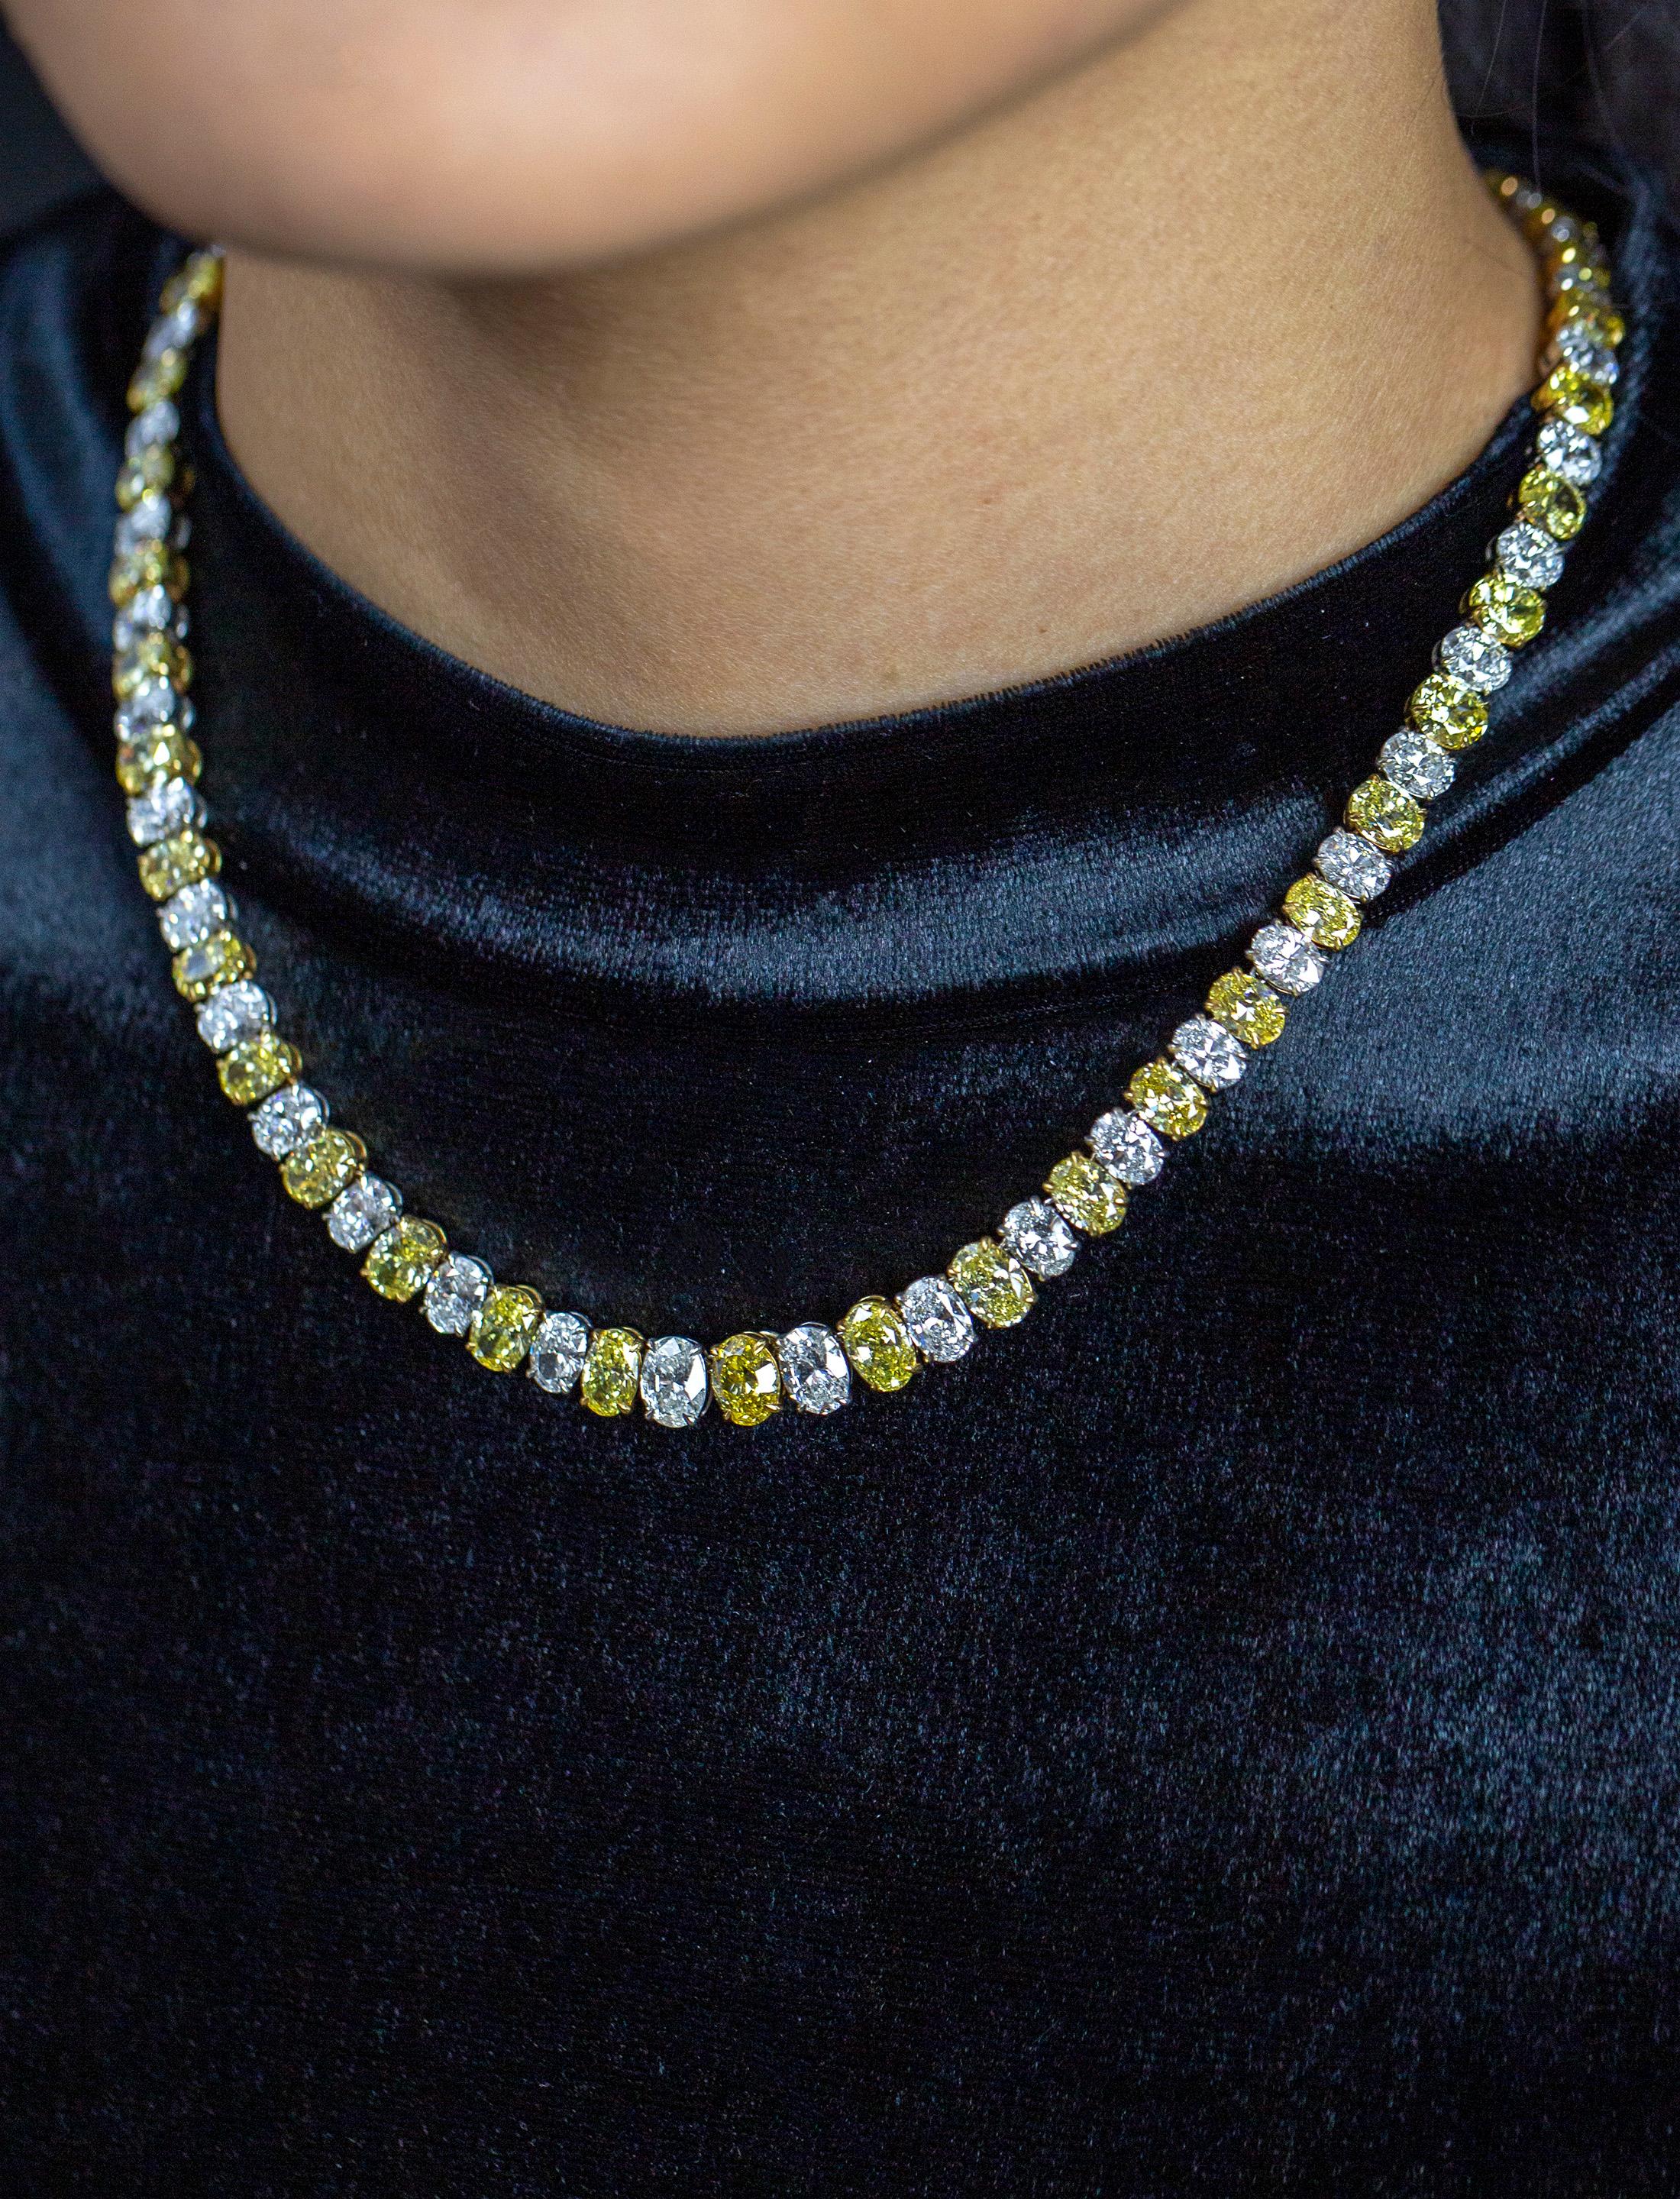 Contemporary Roman Malakov 54.75 Carat Oval Cut Yellow and White Diamond Tennis Necklace For Sale